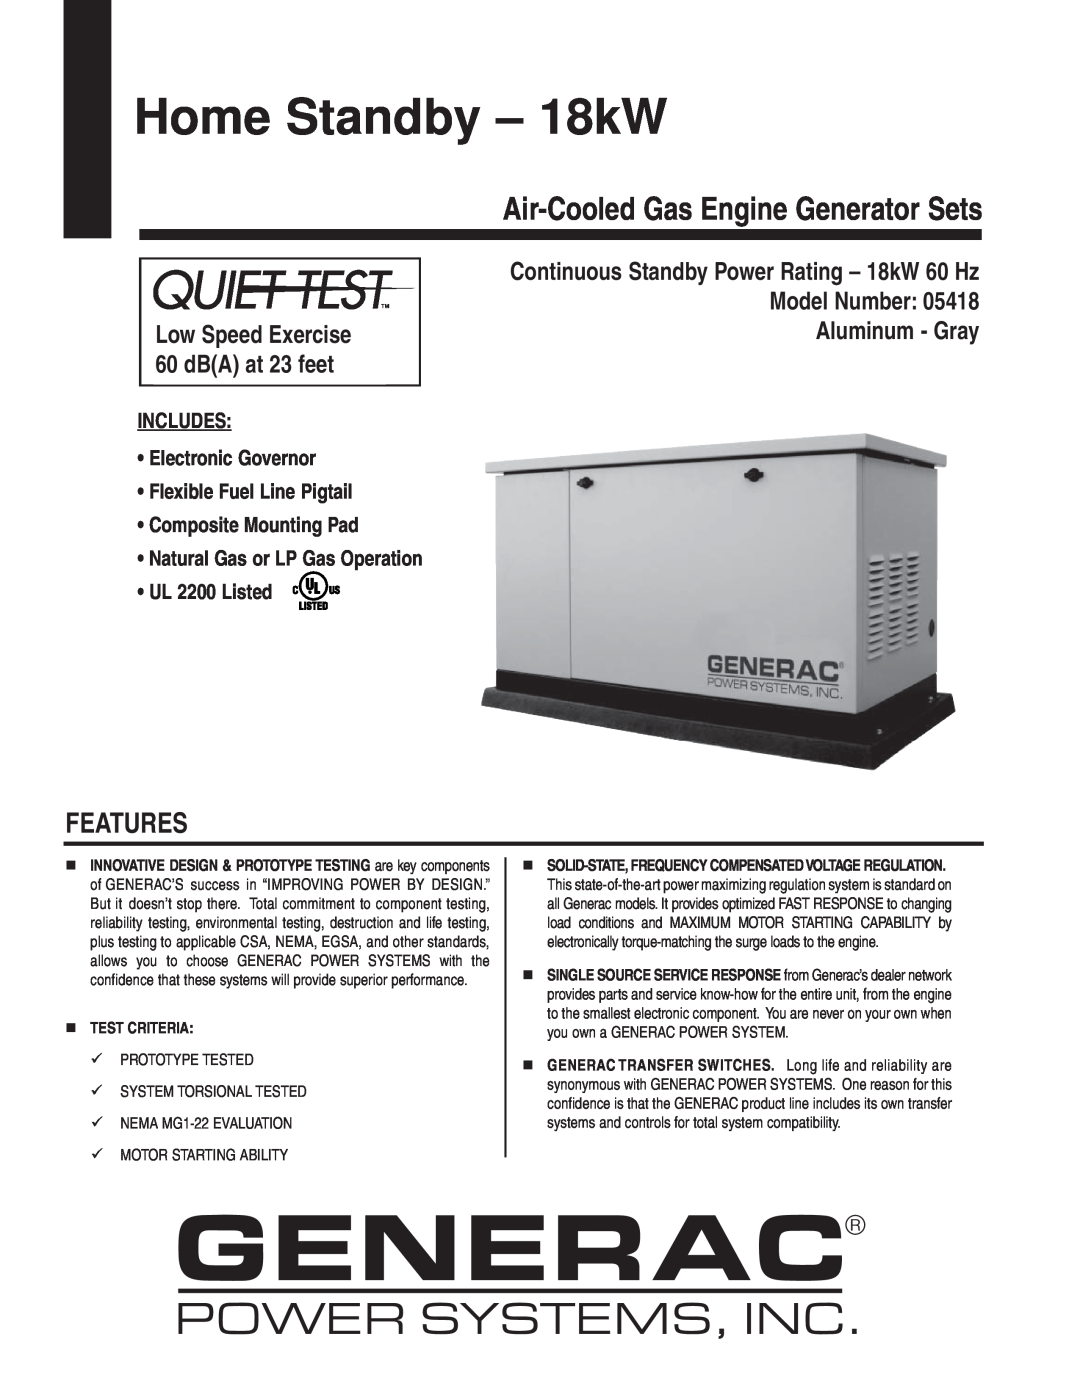 Generac Power Systems 5418 manual Features, Model Number Aluminum - Gray, Low Speed Exercise, Home Standby - 18kW 